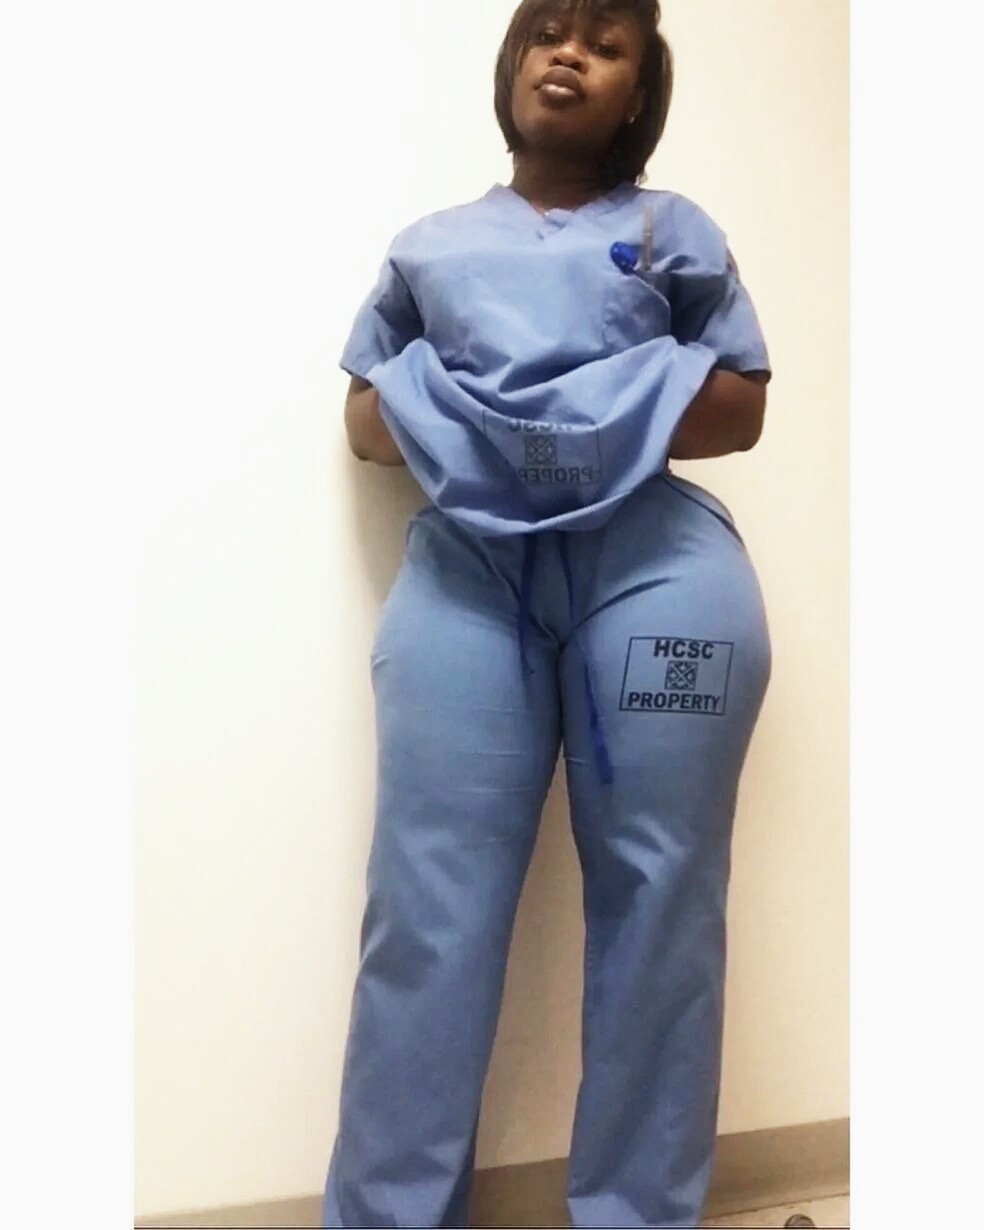 Photos Of A Curvy Nurse That Has Kept The Internet Unsettled For Days